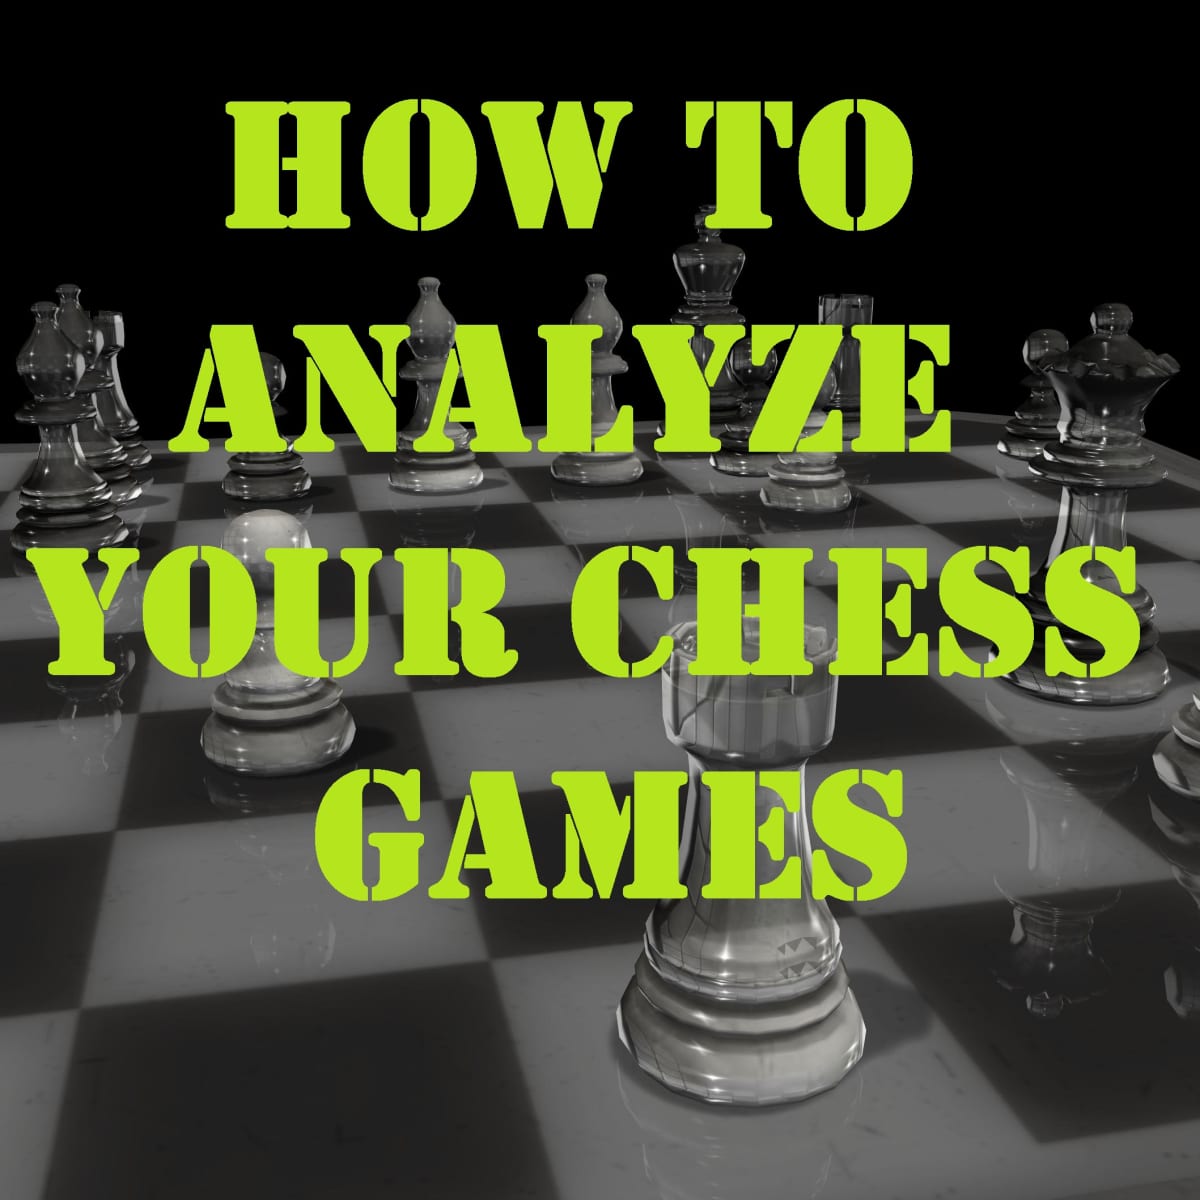 How do I save an analysis? - Chess.com Member Support and FAQs